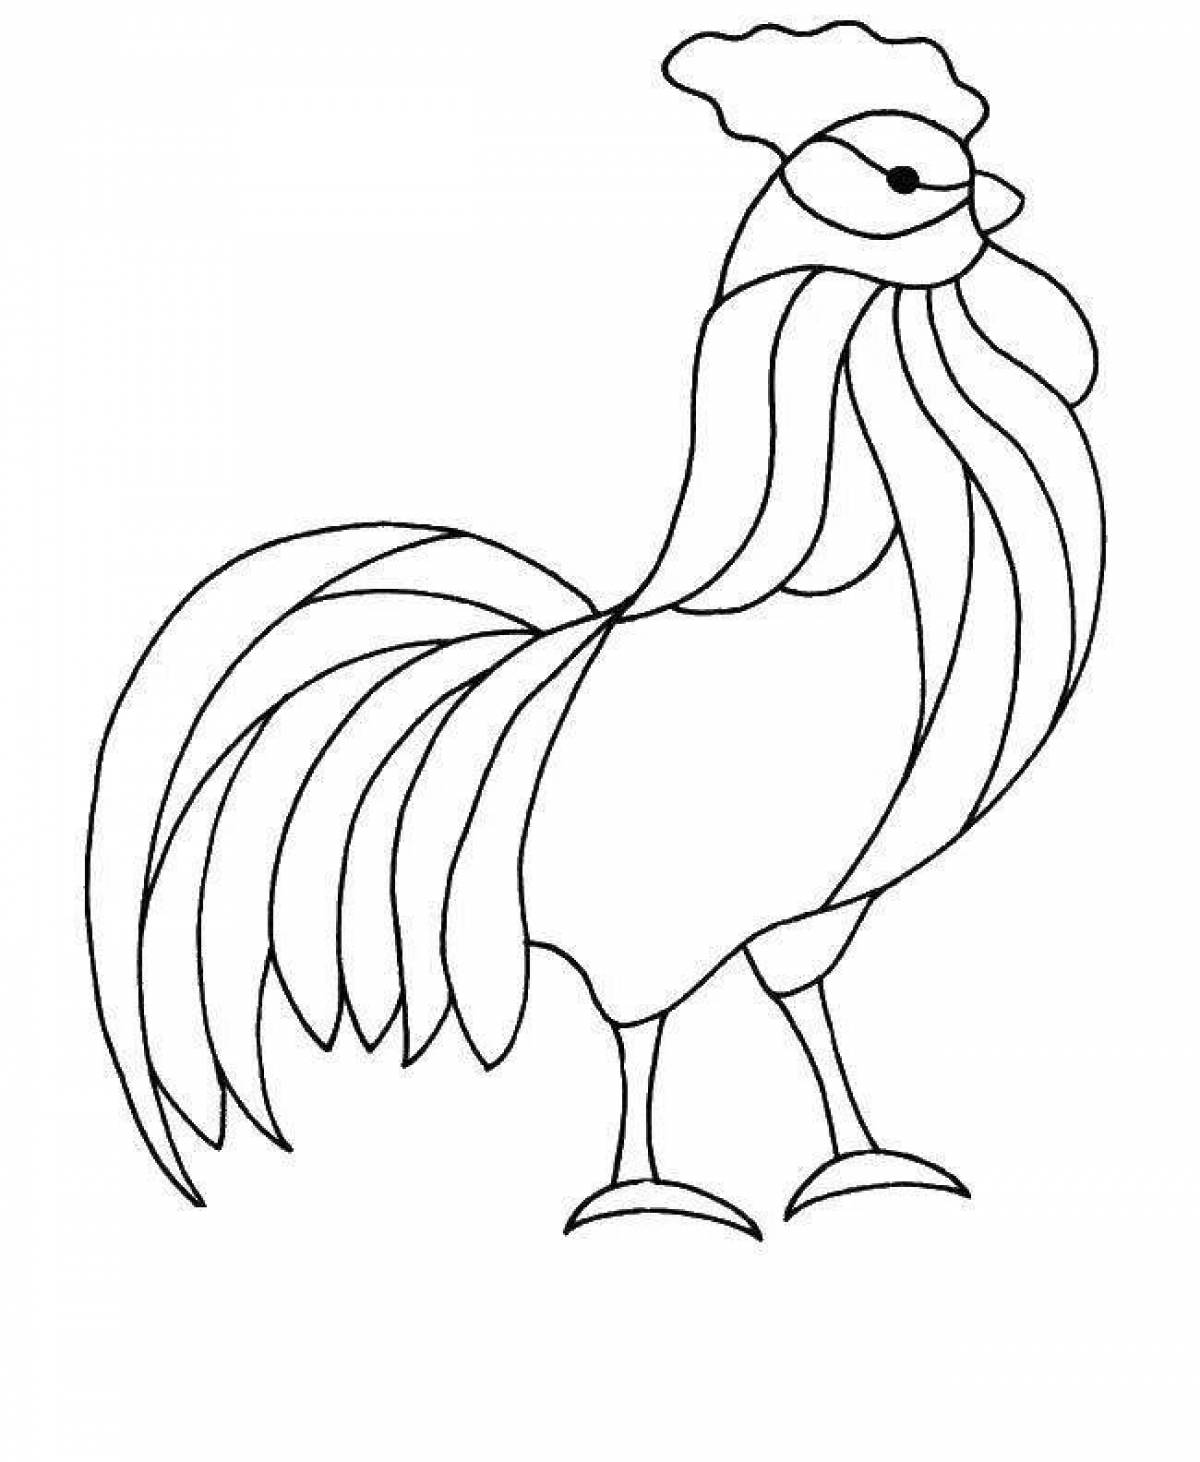 Live cock coloring for kids